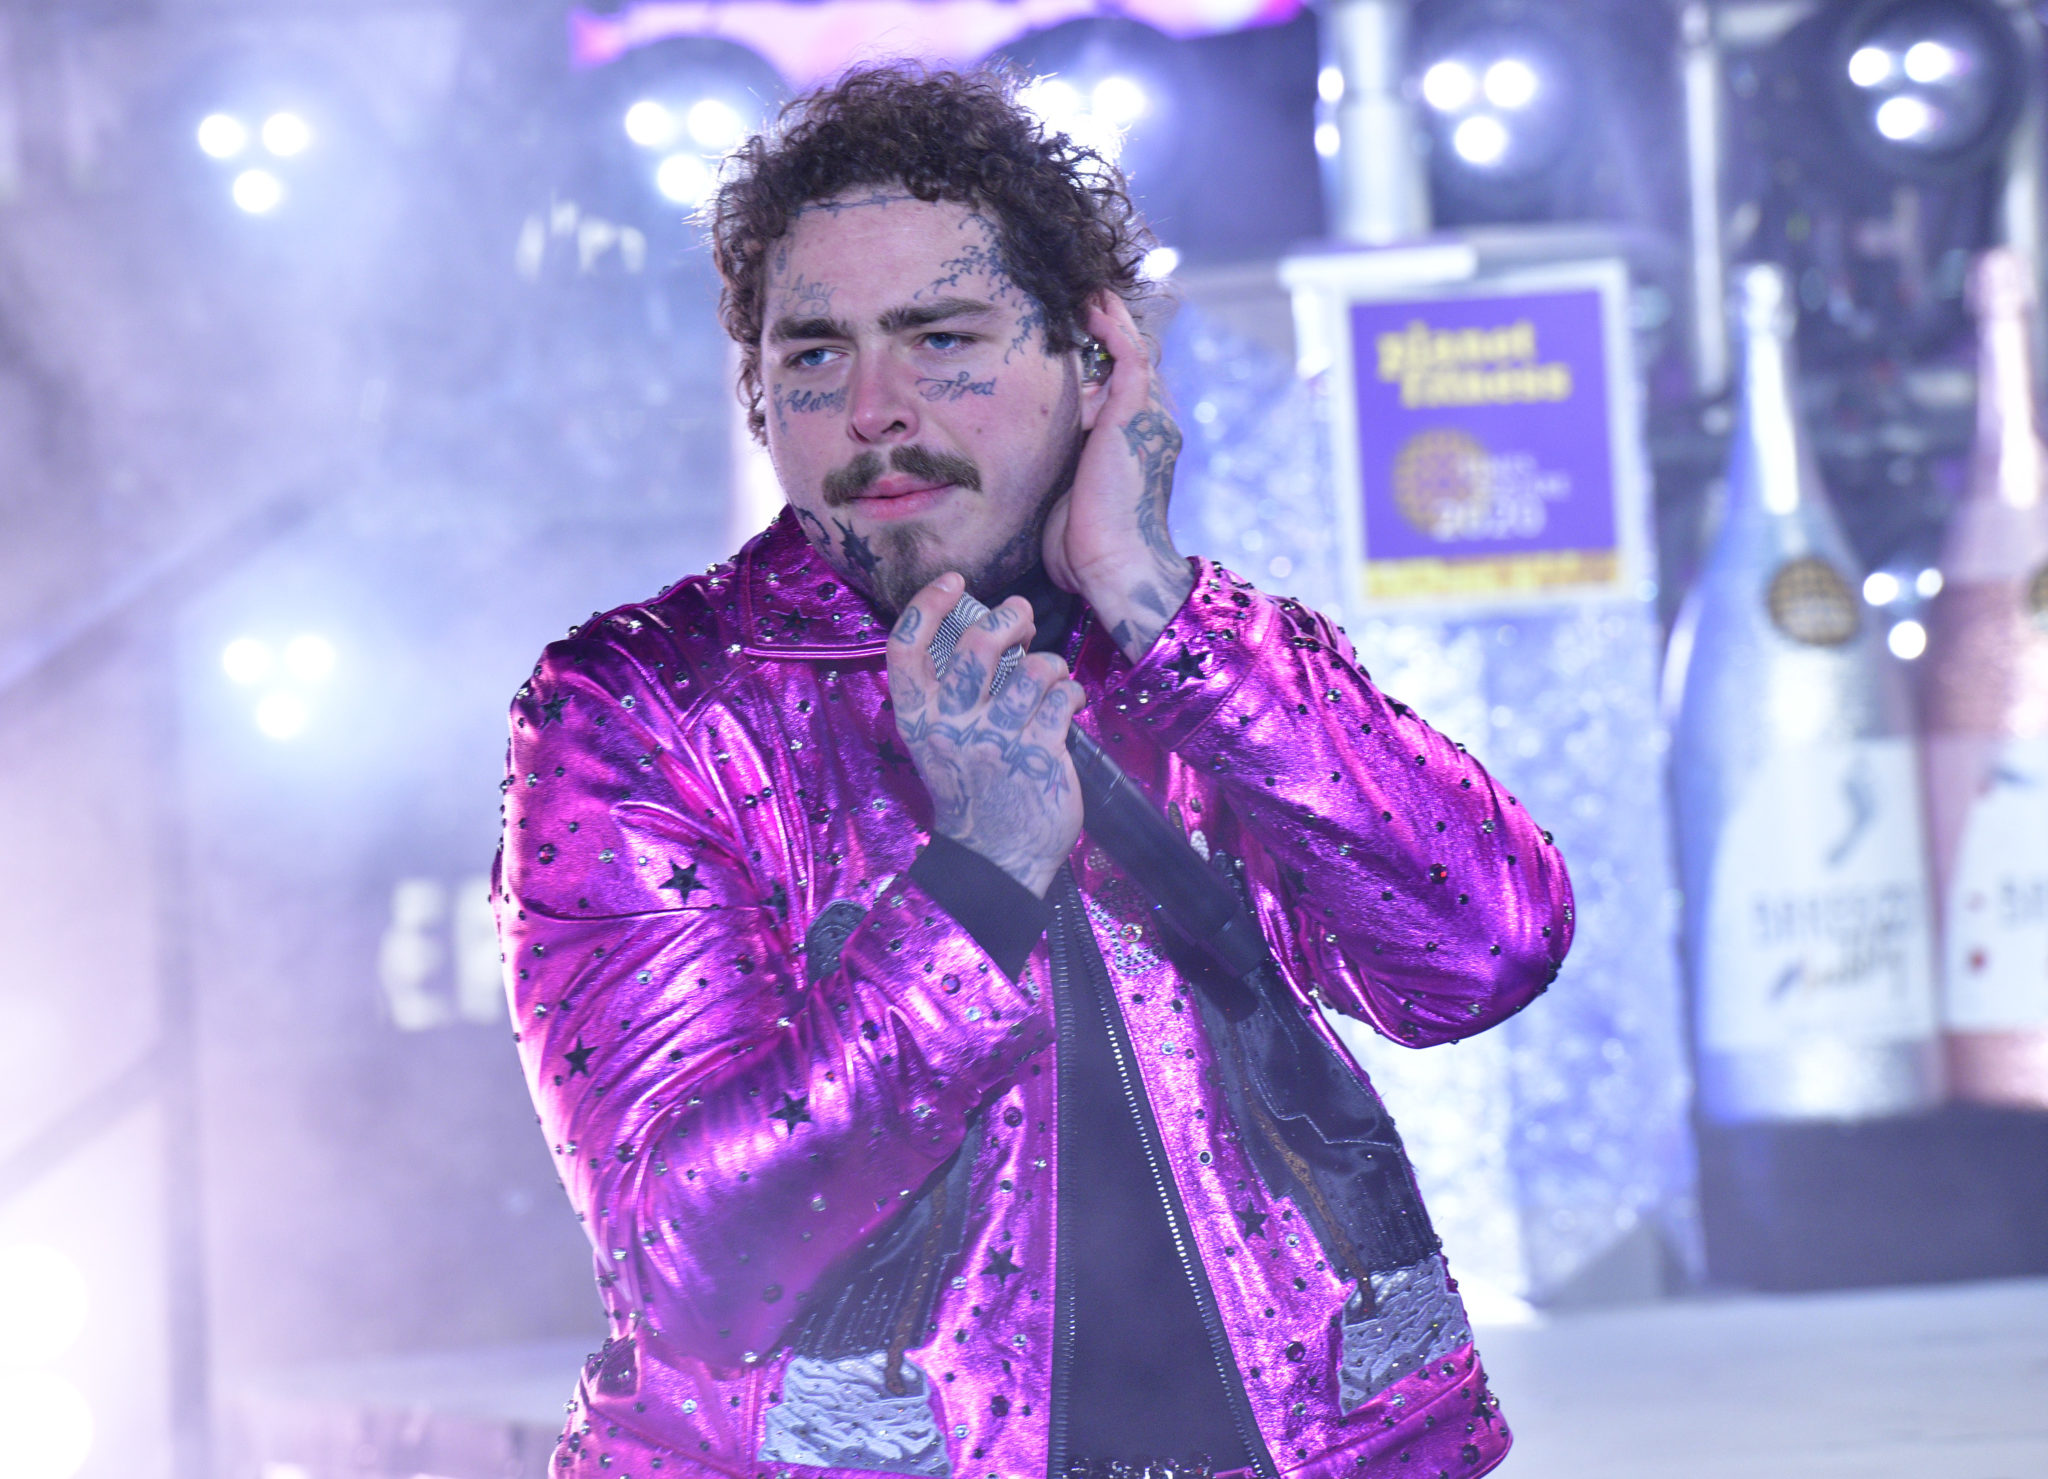 No, Post Malone is not dead What happened on stage at St Louis concert